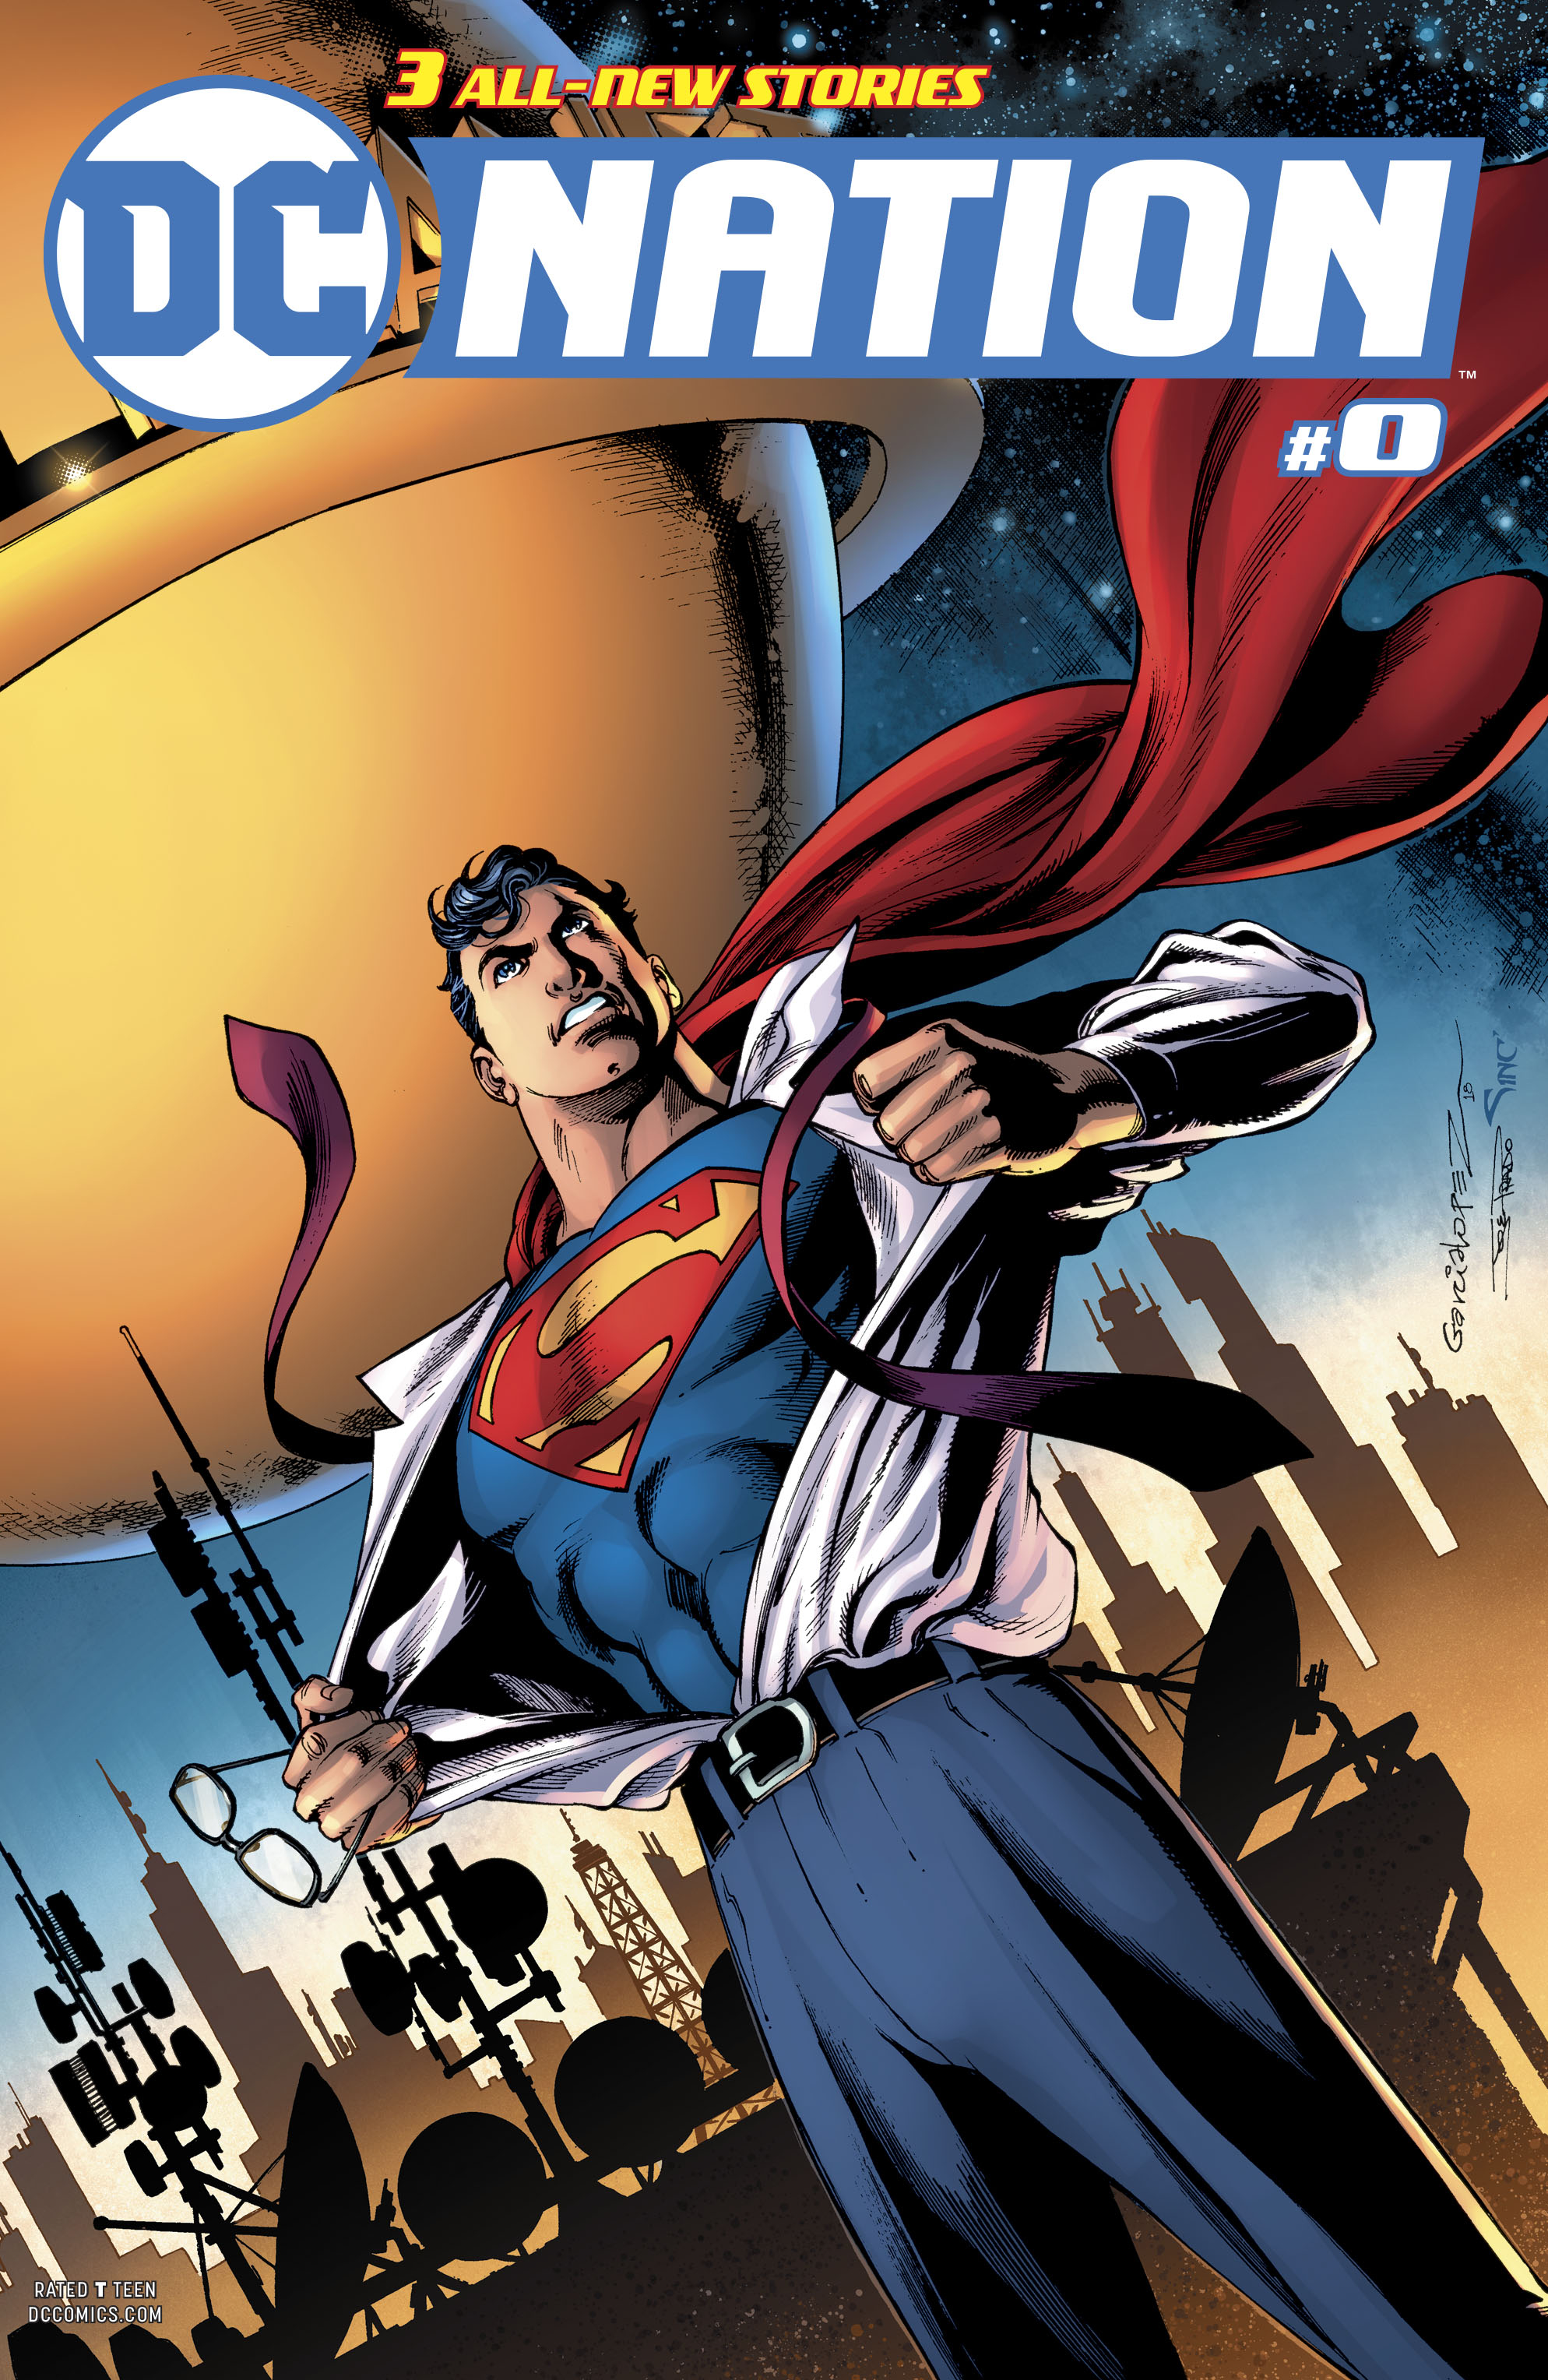 DC Nation no. 0 (2018 Series) (Superman Cover)